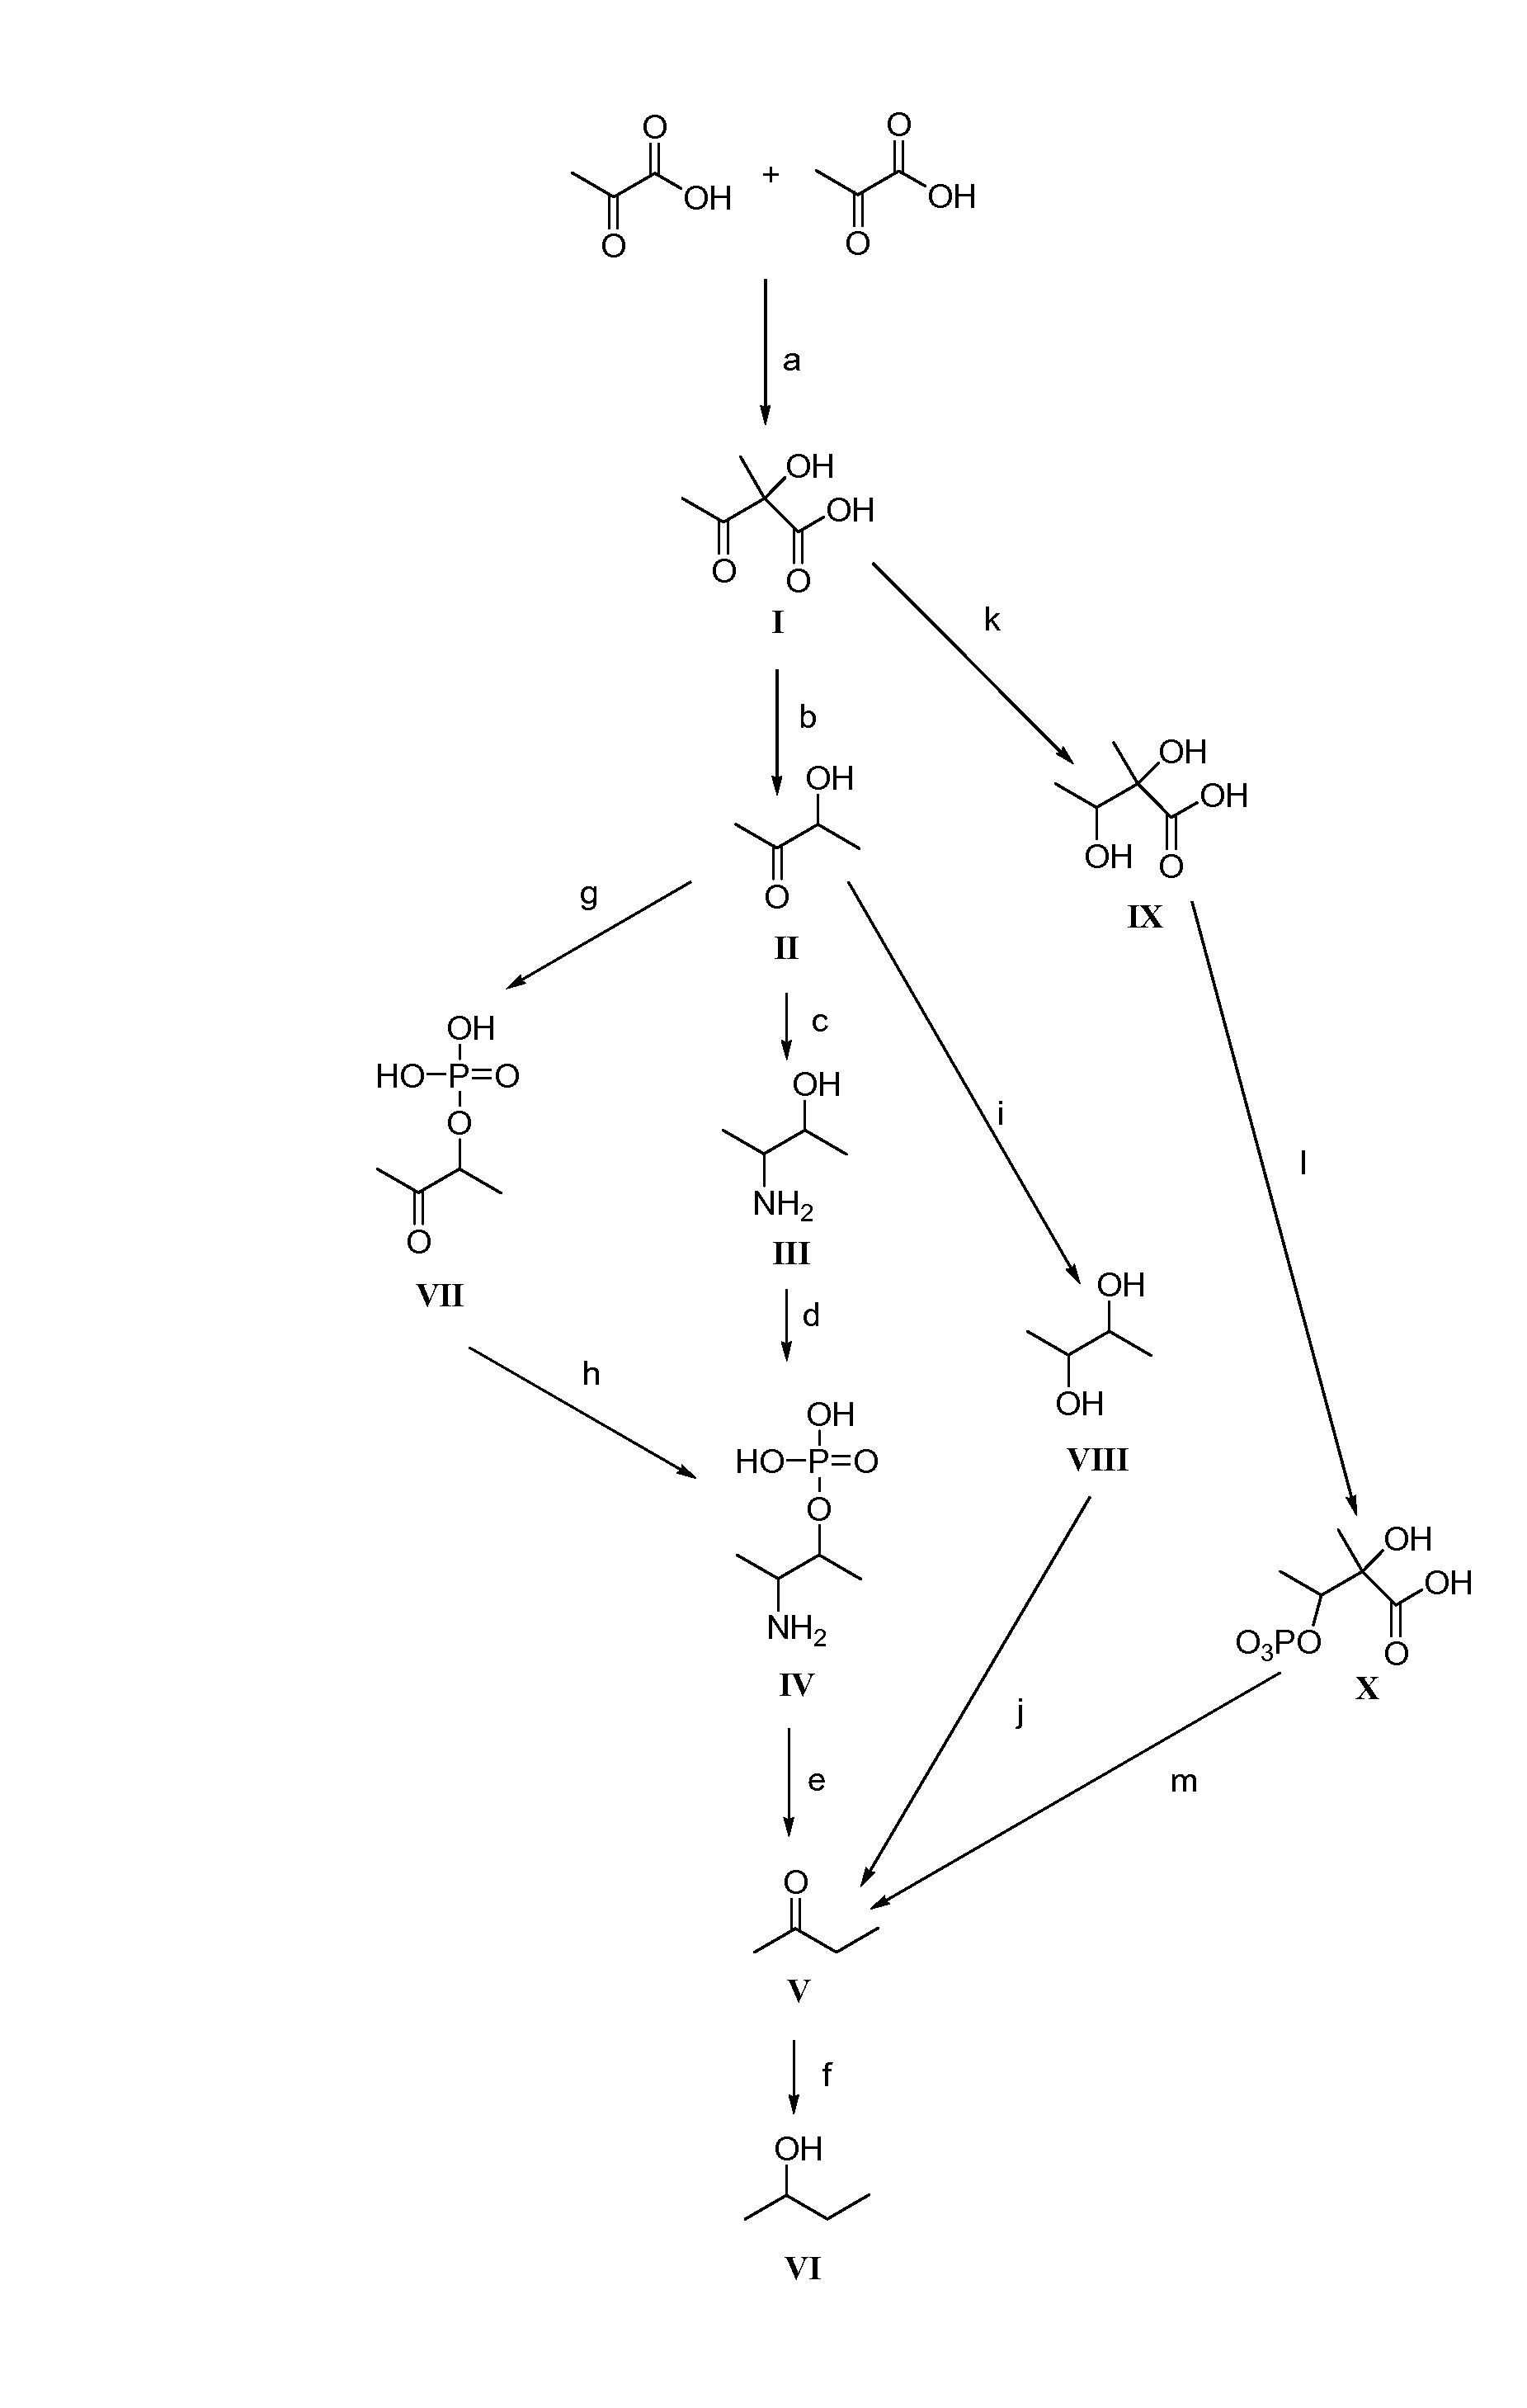 Method for the production of 2-butanone